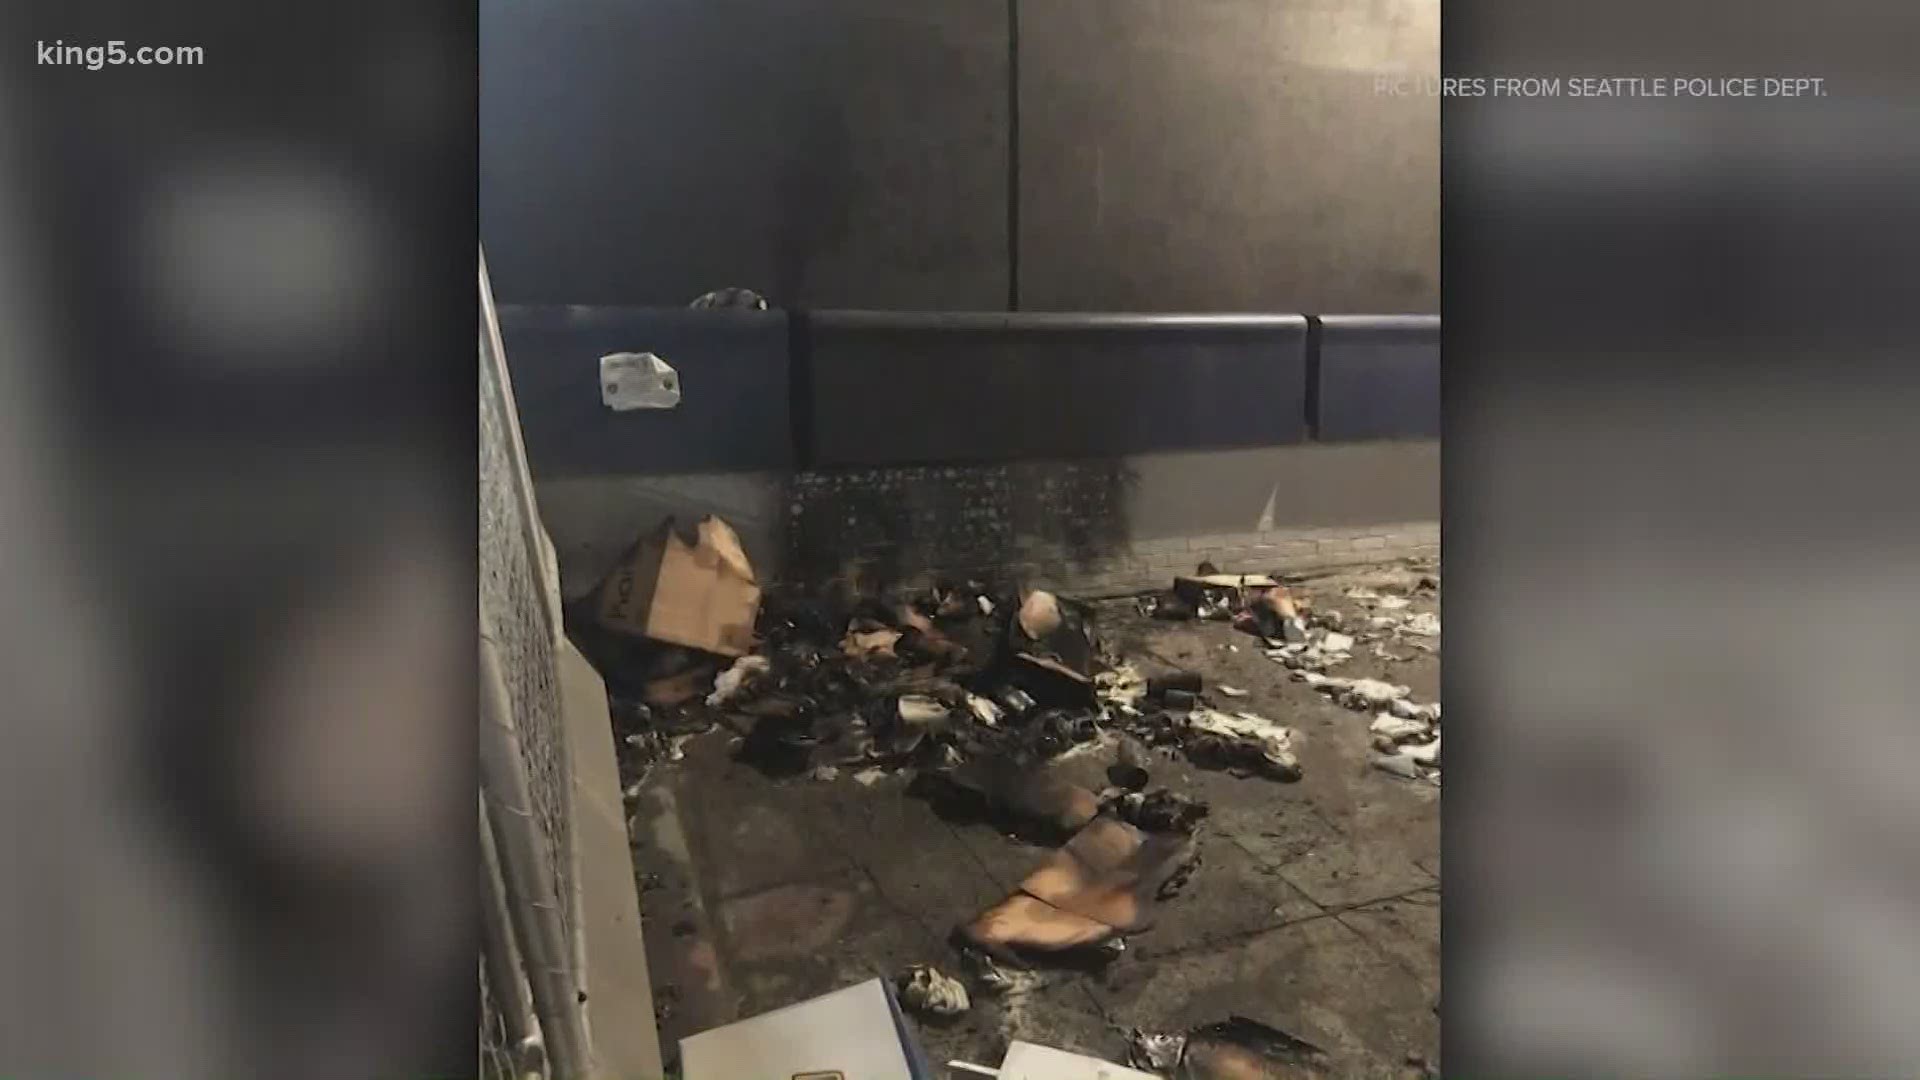 A man from Alaska is being held by federal authorities after police believe he attempted to burn down the Seattle Police Department's East Precinct.